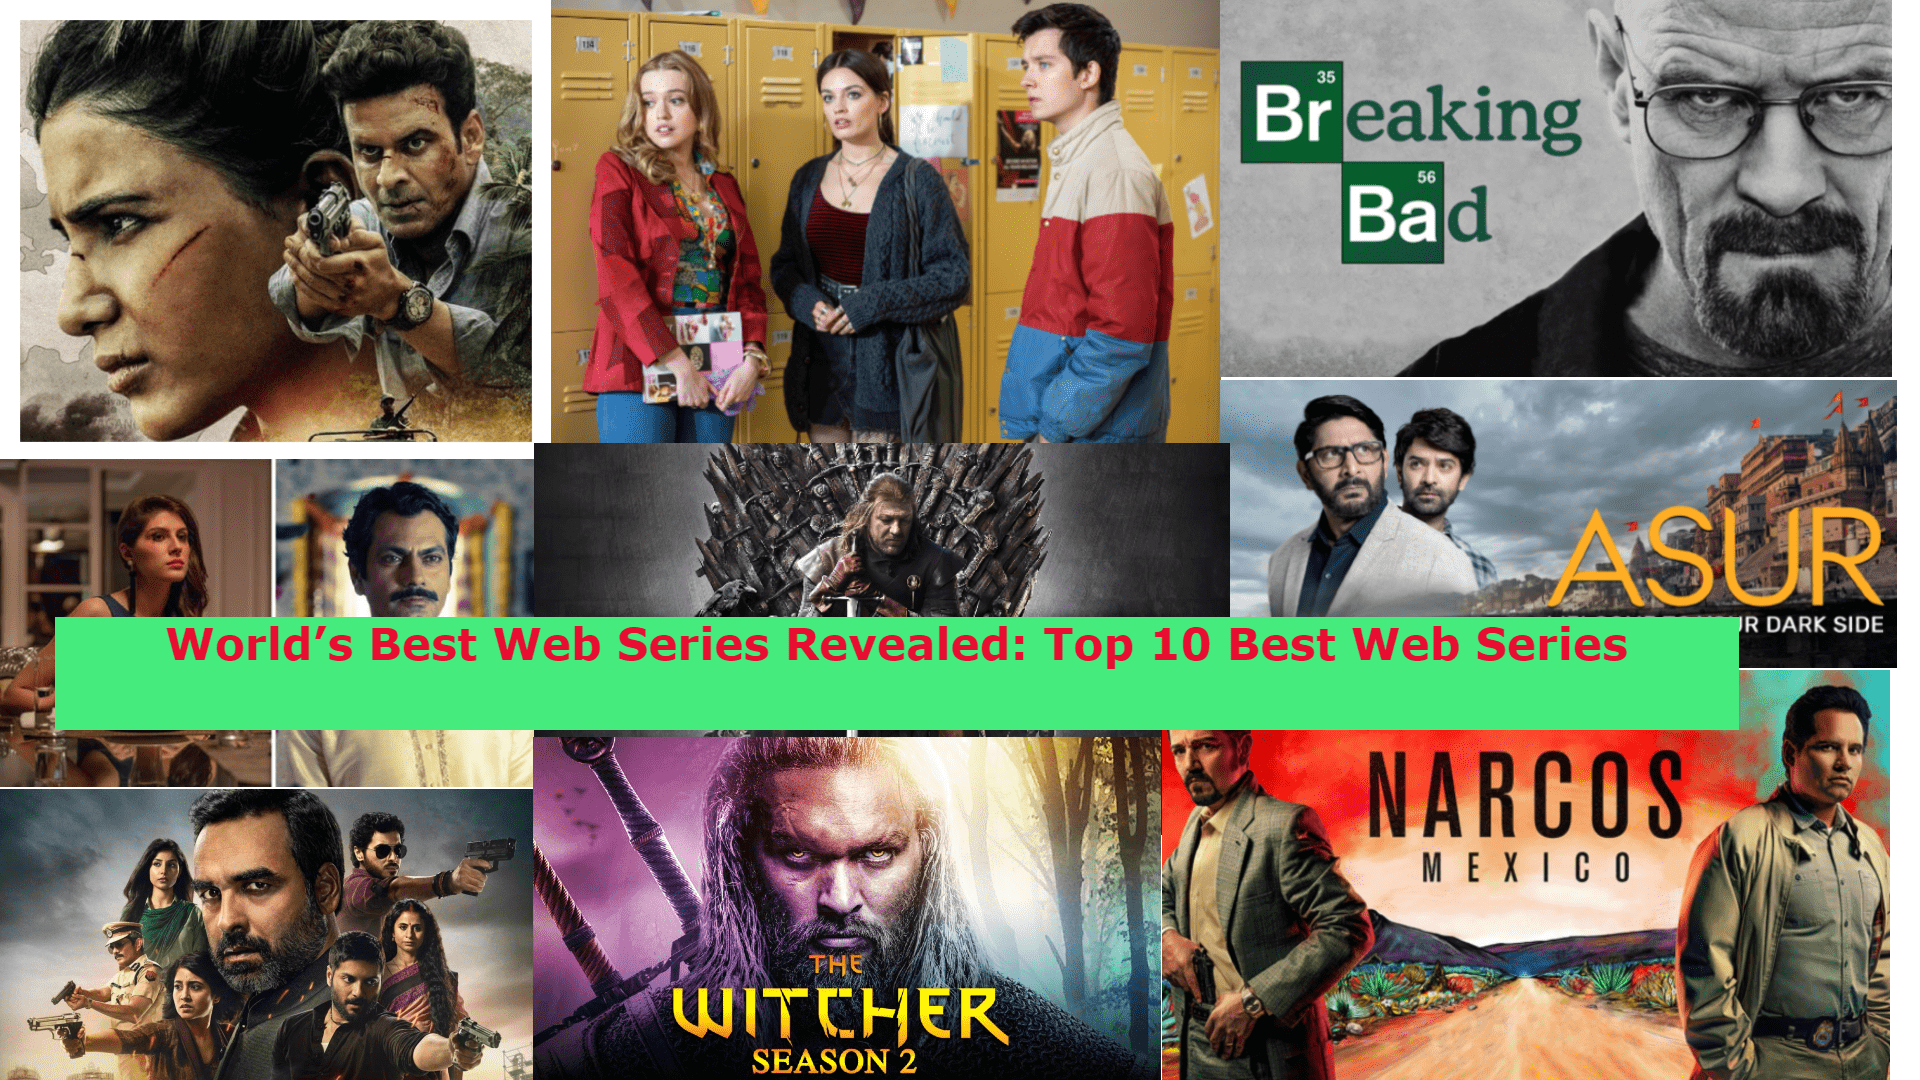 What are the top 5 best Hollywood web series of all time available